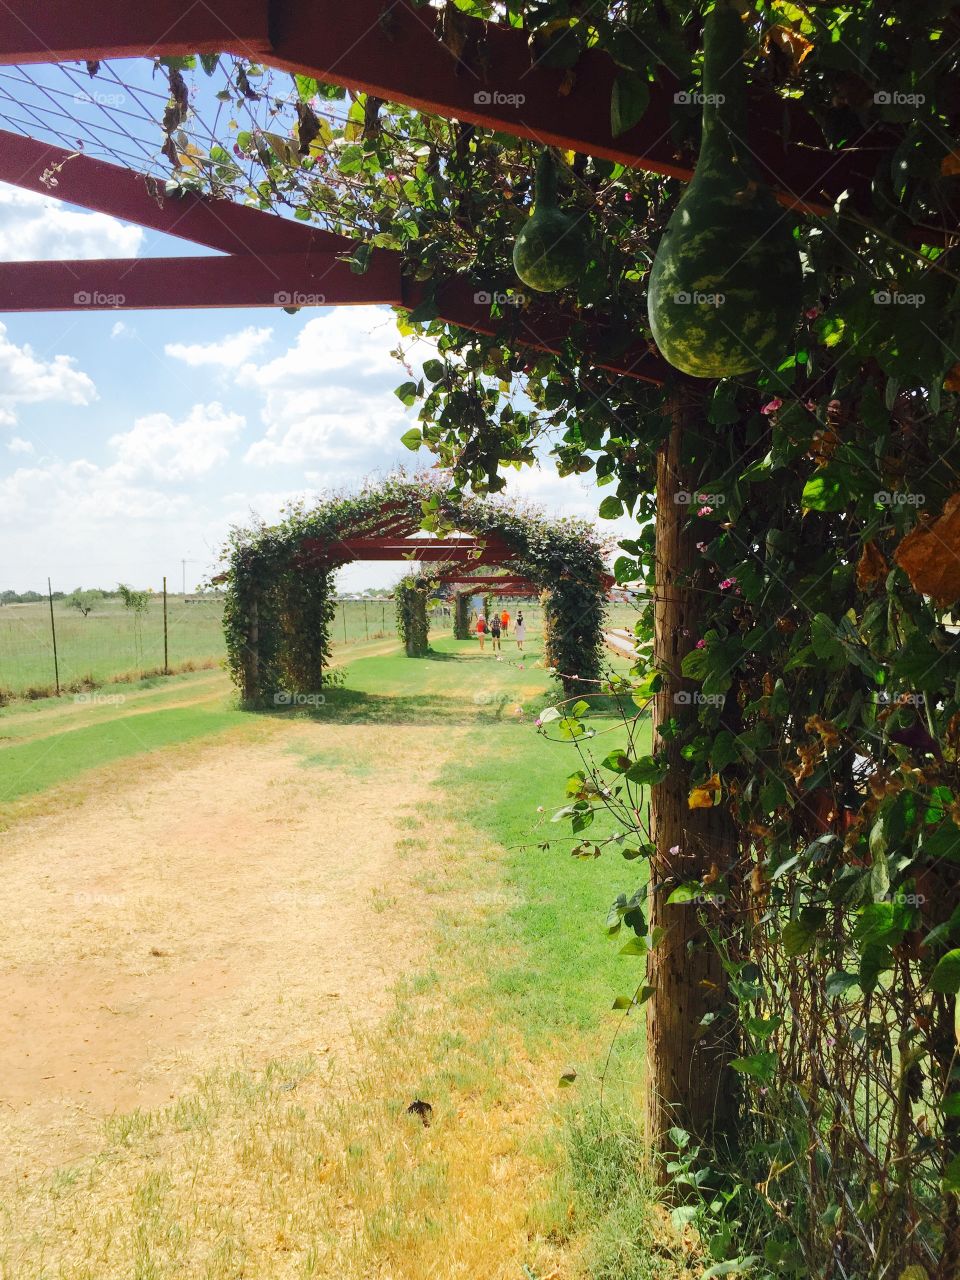 Sweetberry Farms in Marble Falls, Texas